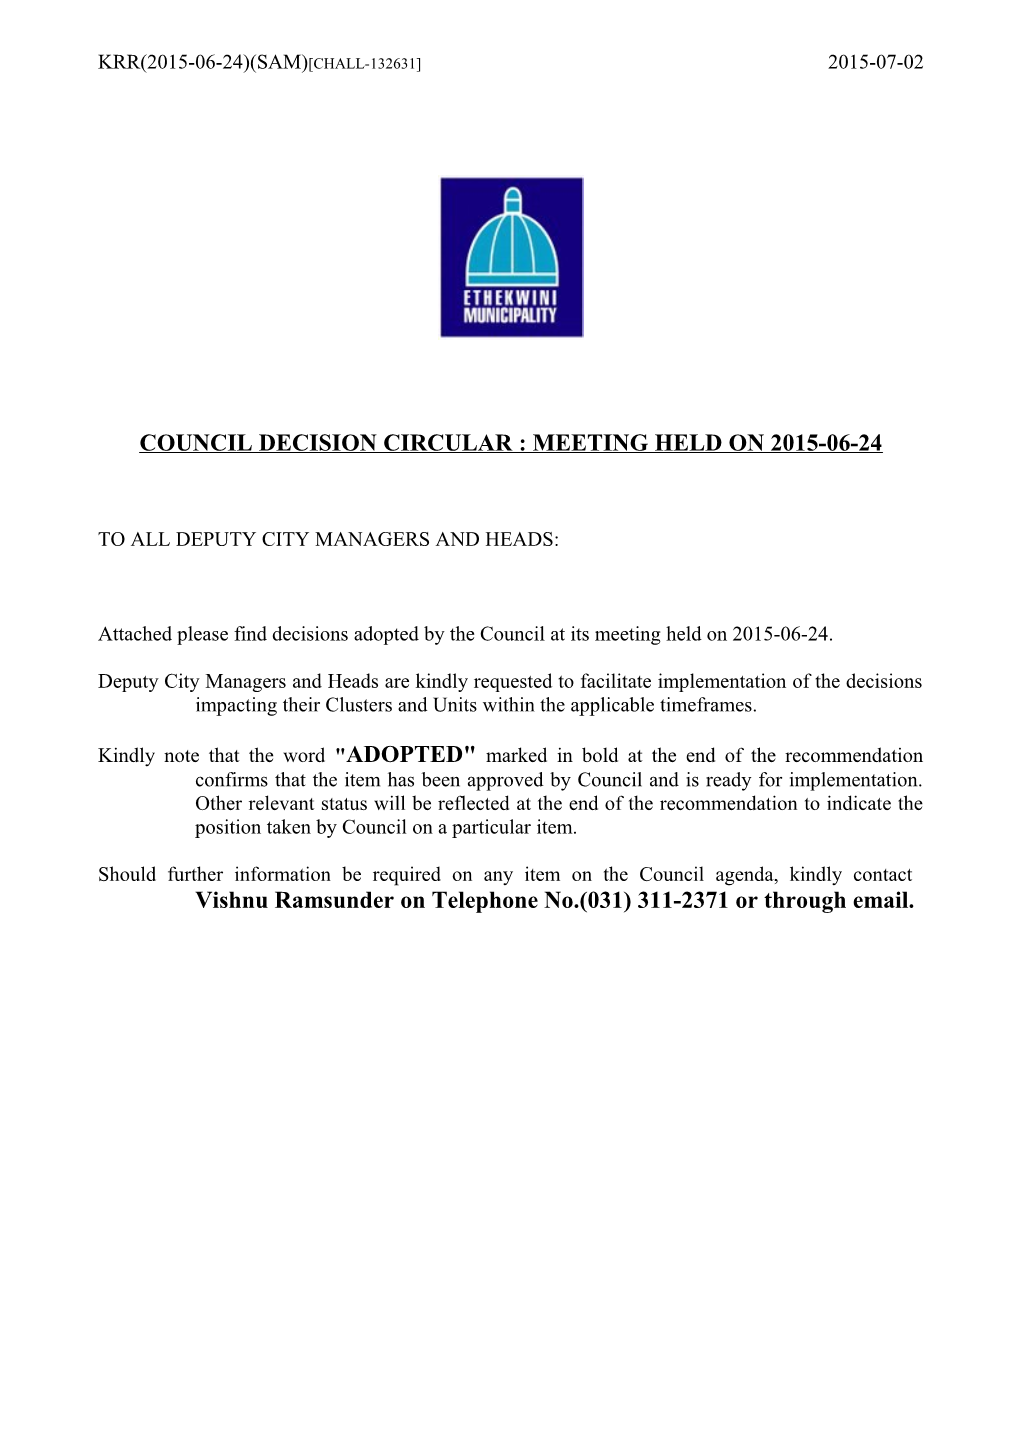 Council Decision Circular : Meeting Held on 2015-06-24